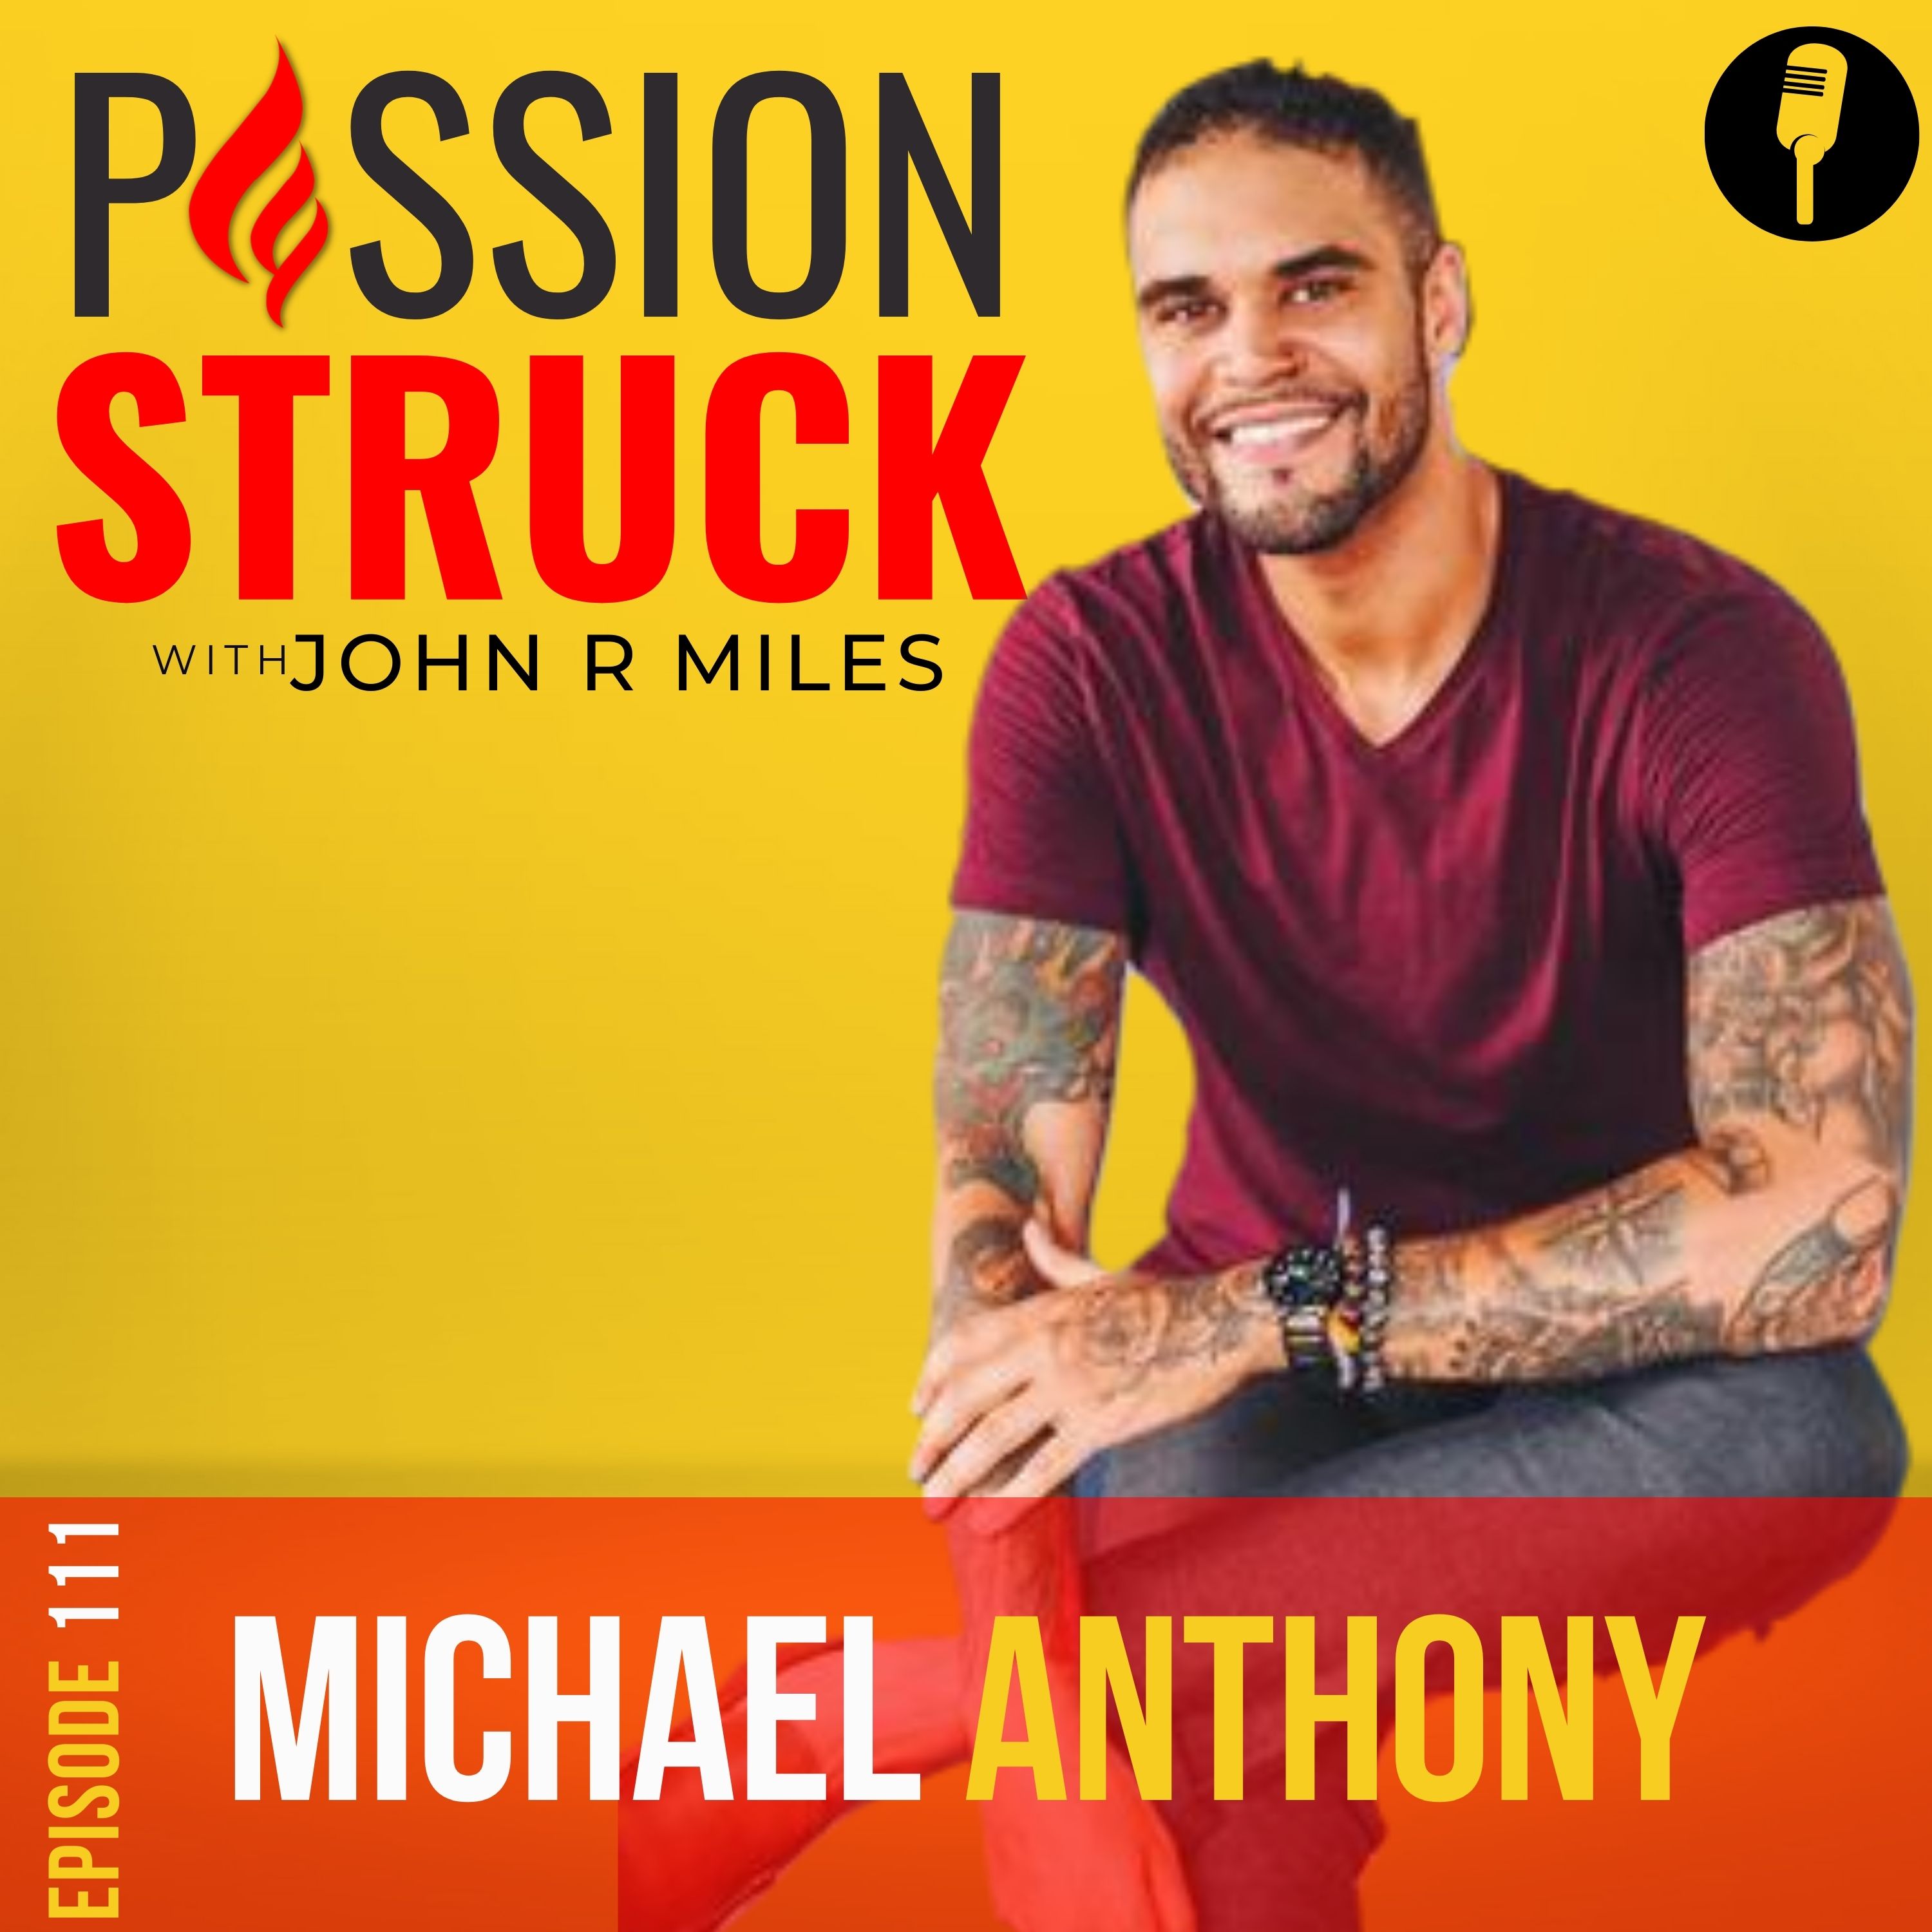 Passion Struck podcast with Michael Anthony episode 111